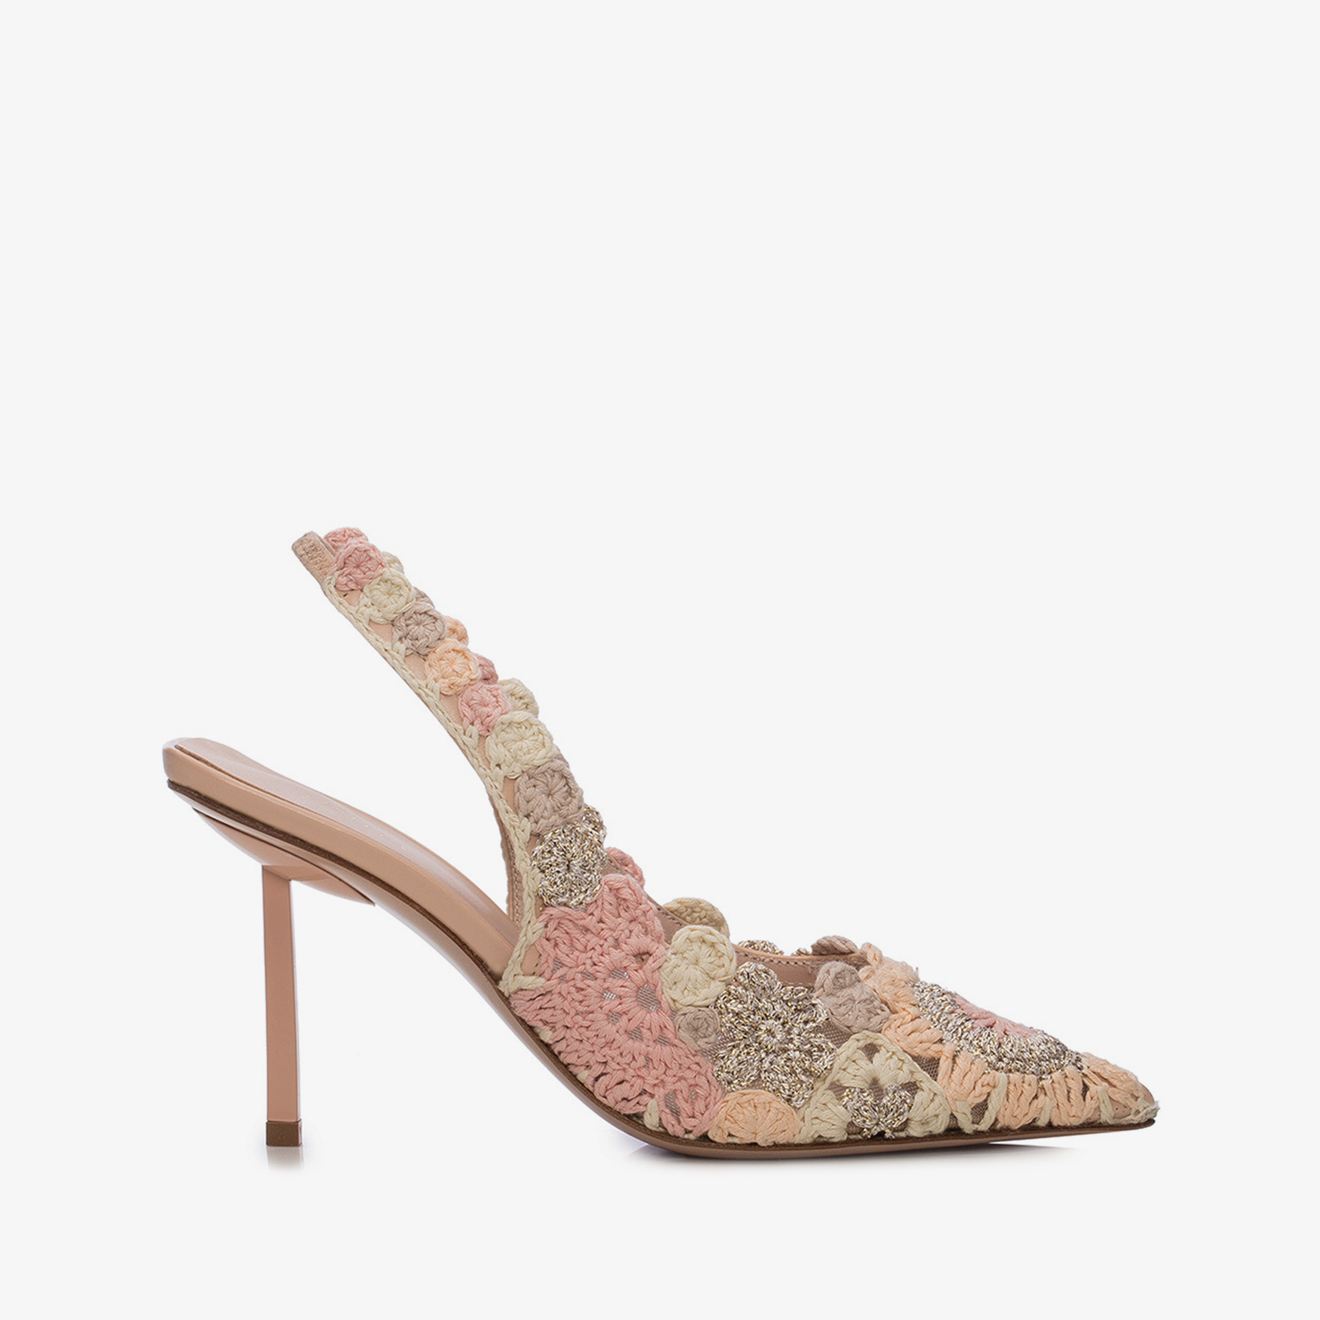 MURIEL SLINGBACK 80 mm - Le Silla official outlet